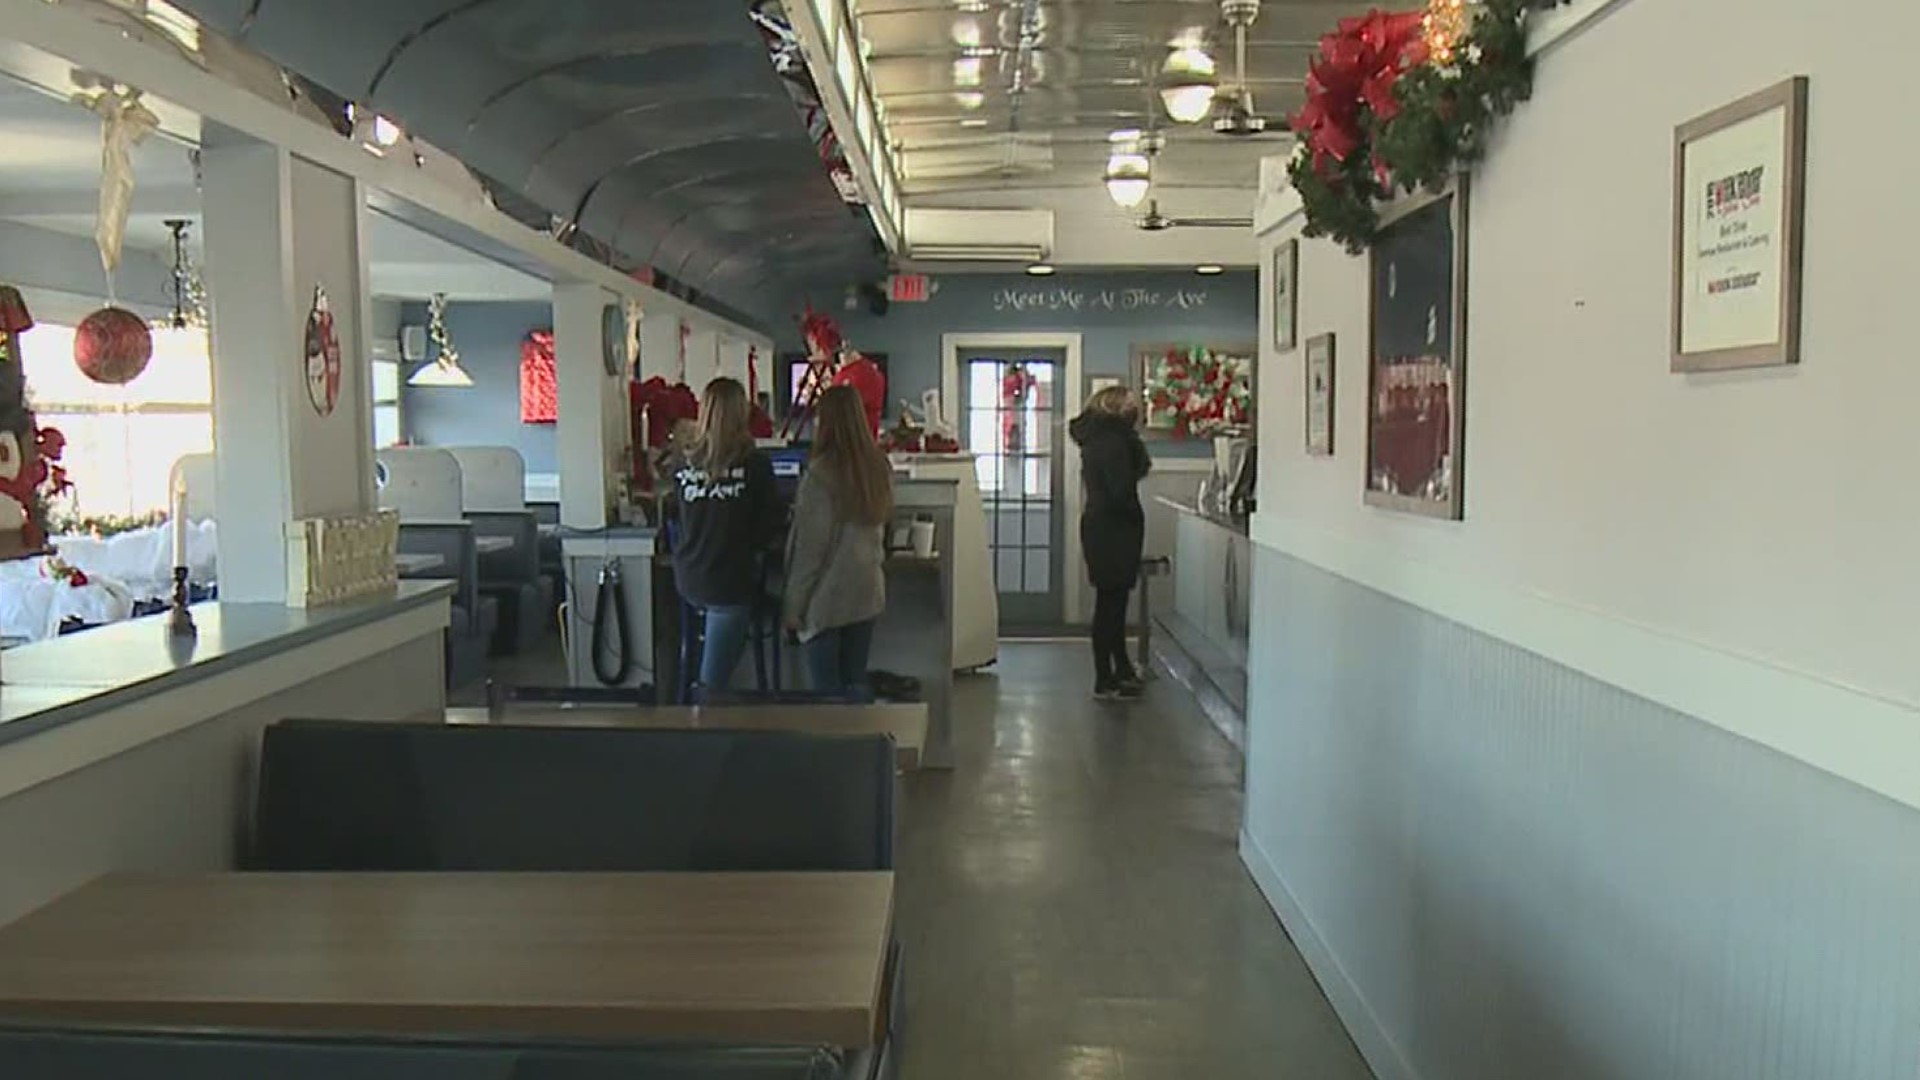 Some small business owners are worried the shutdown could go on longer than initially planned.